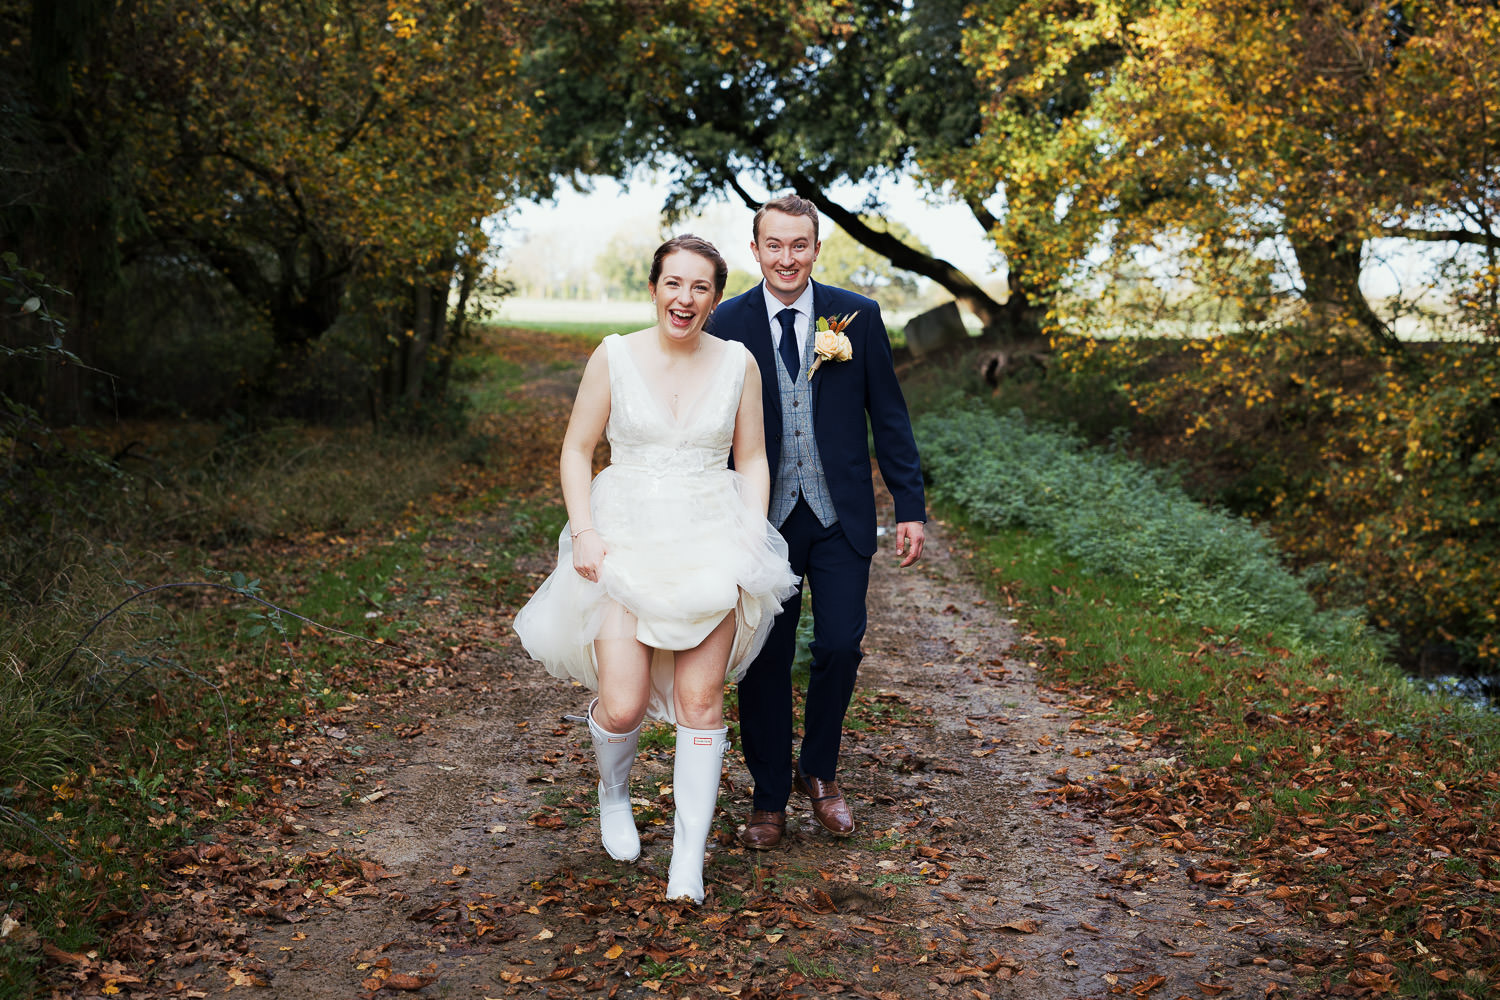 Newly married couple at Houchins in Essex. They are walking along a muddy lane covered with autumnal leaves. The bride is holding up her Jenny Packham dress, May JPB762, to reveal her Hunter wellies.